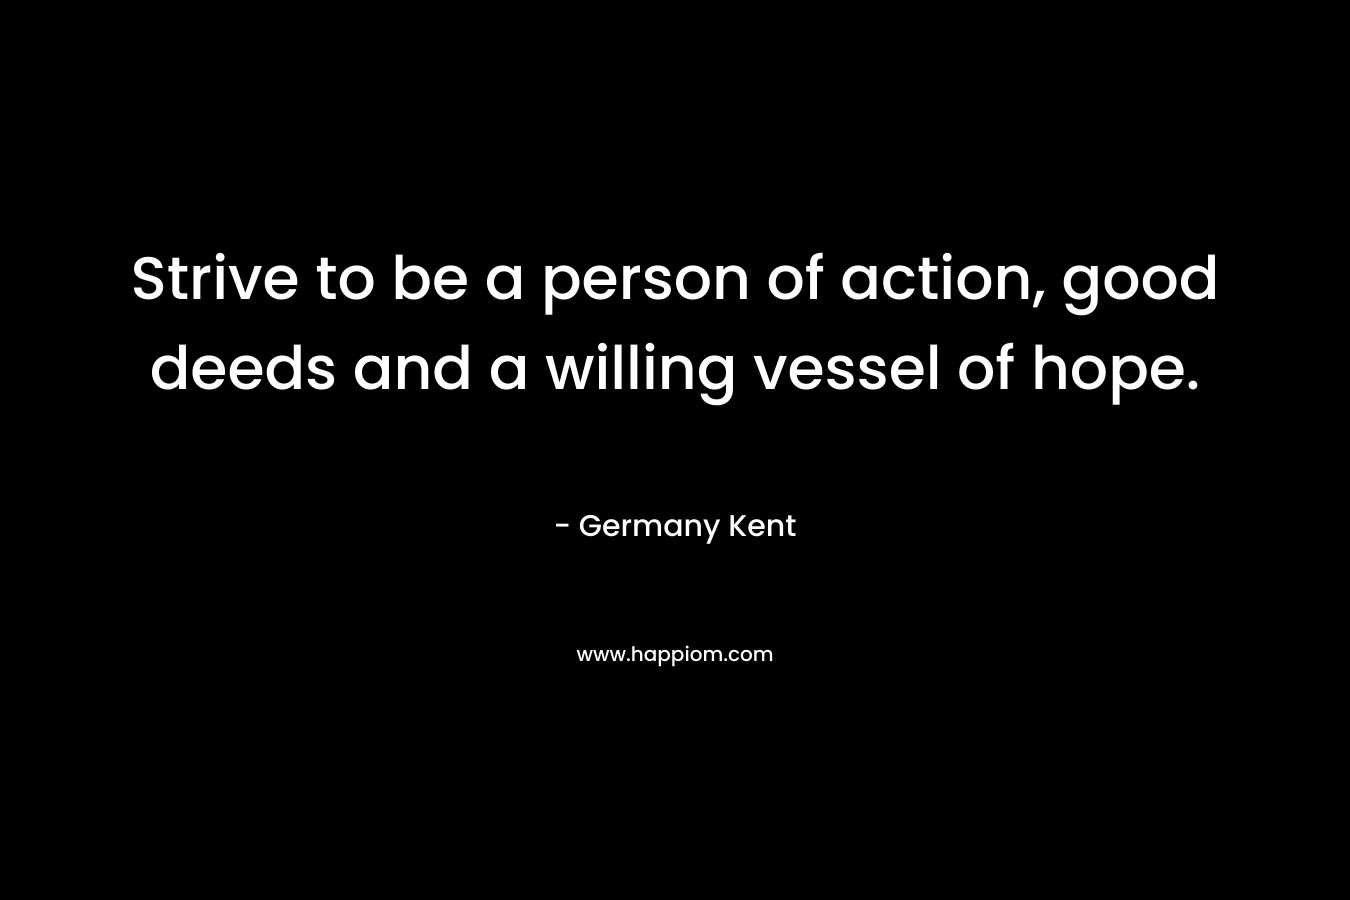 Strive to be a person of action, good deeds and a willing vessel of hope.